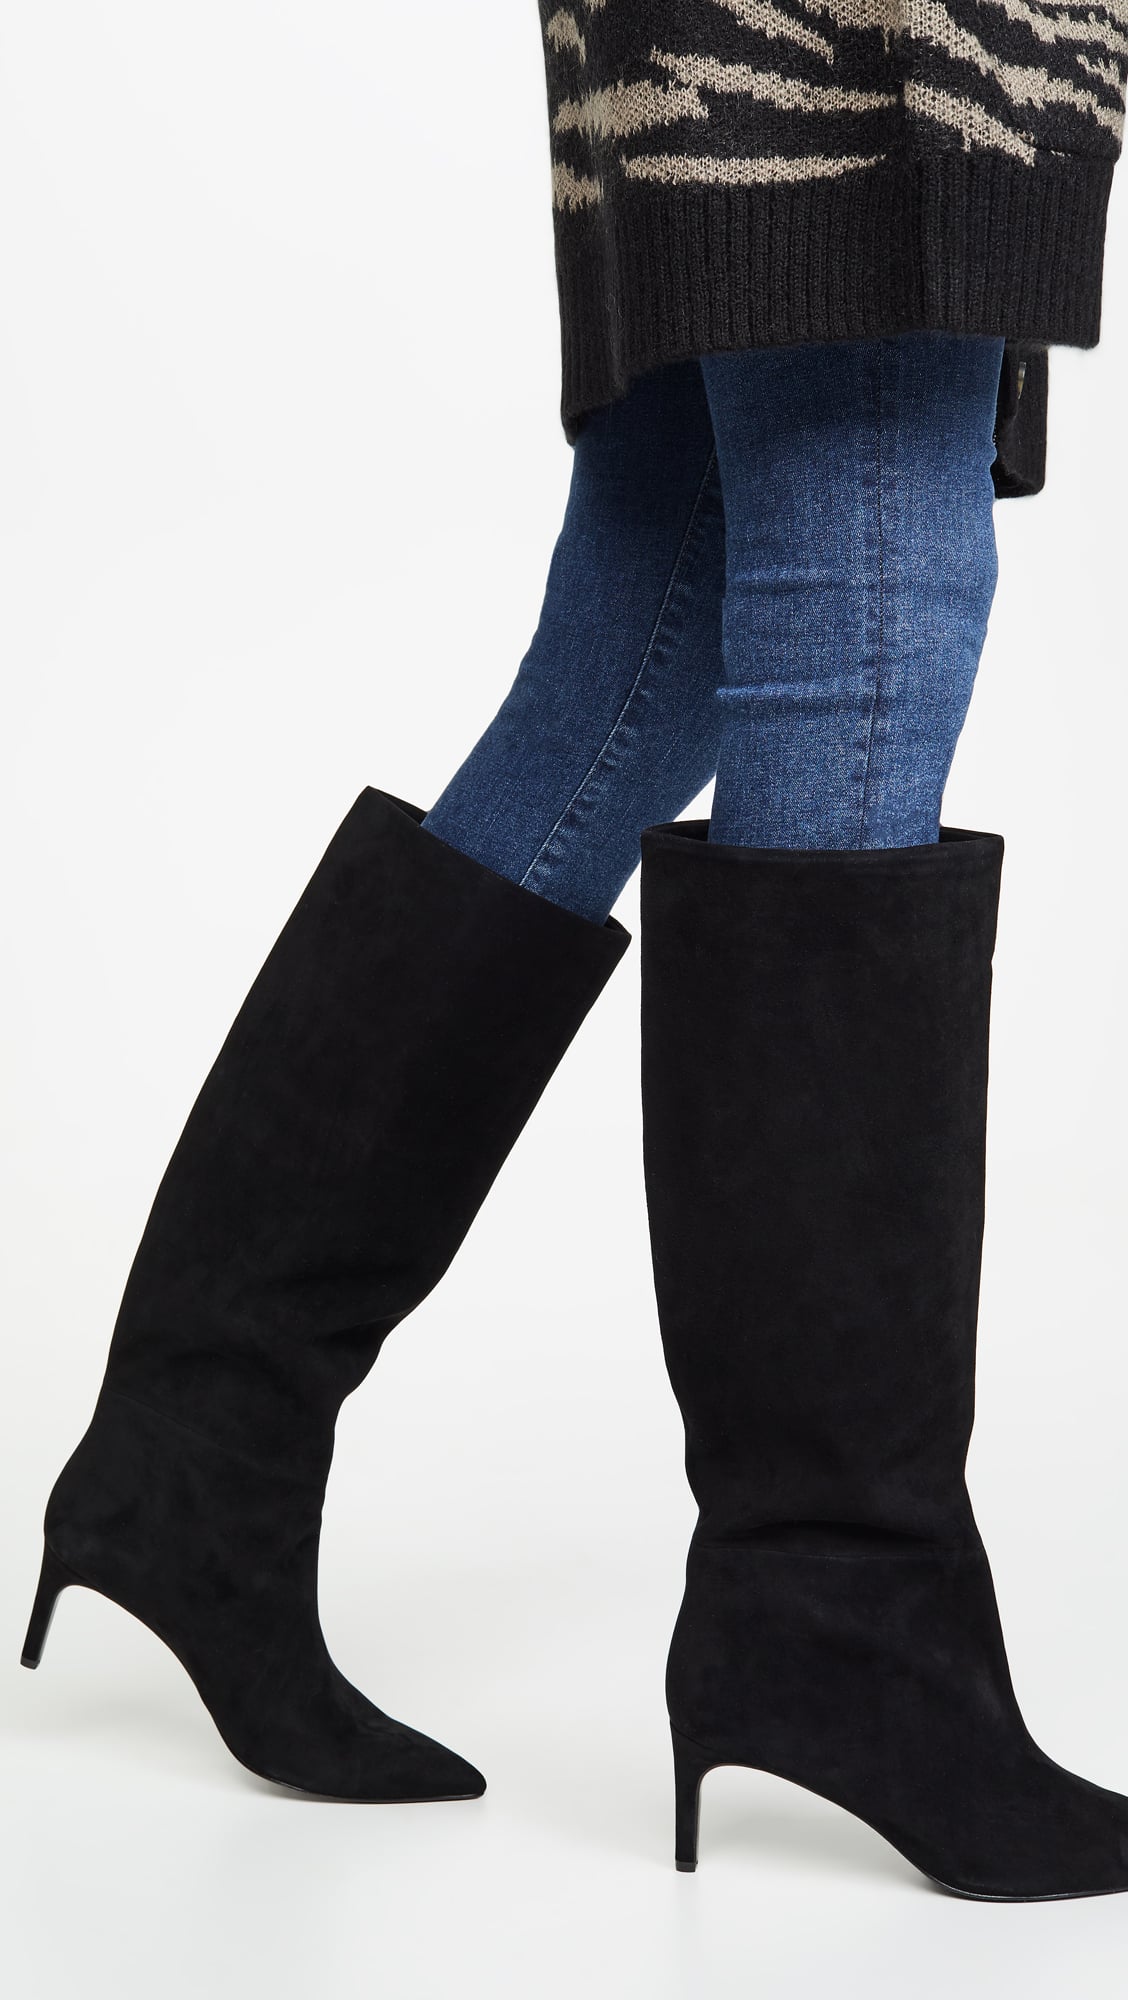 tall suede womens boots